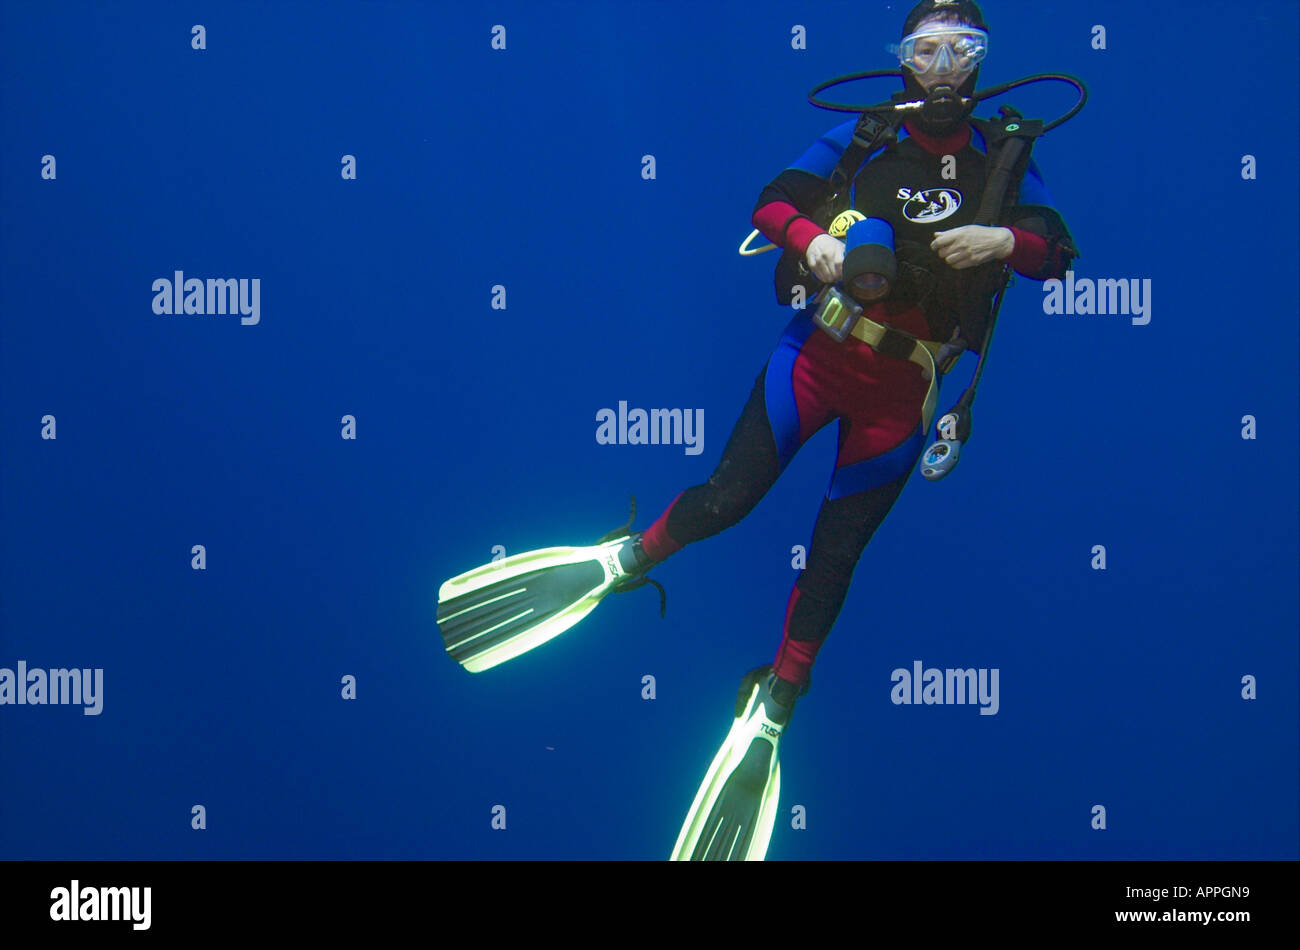 Looking up at a scuba diver in the clear blue underwater world Stock Photo